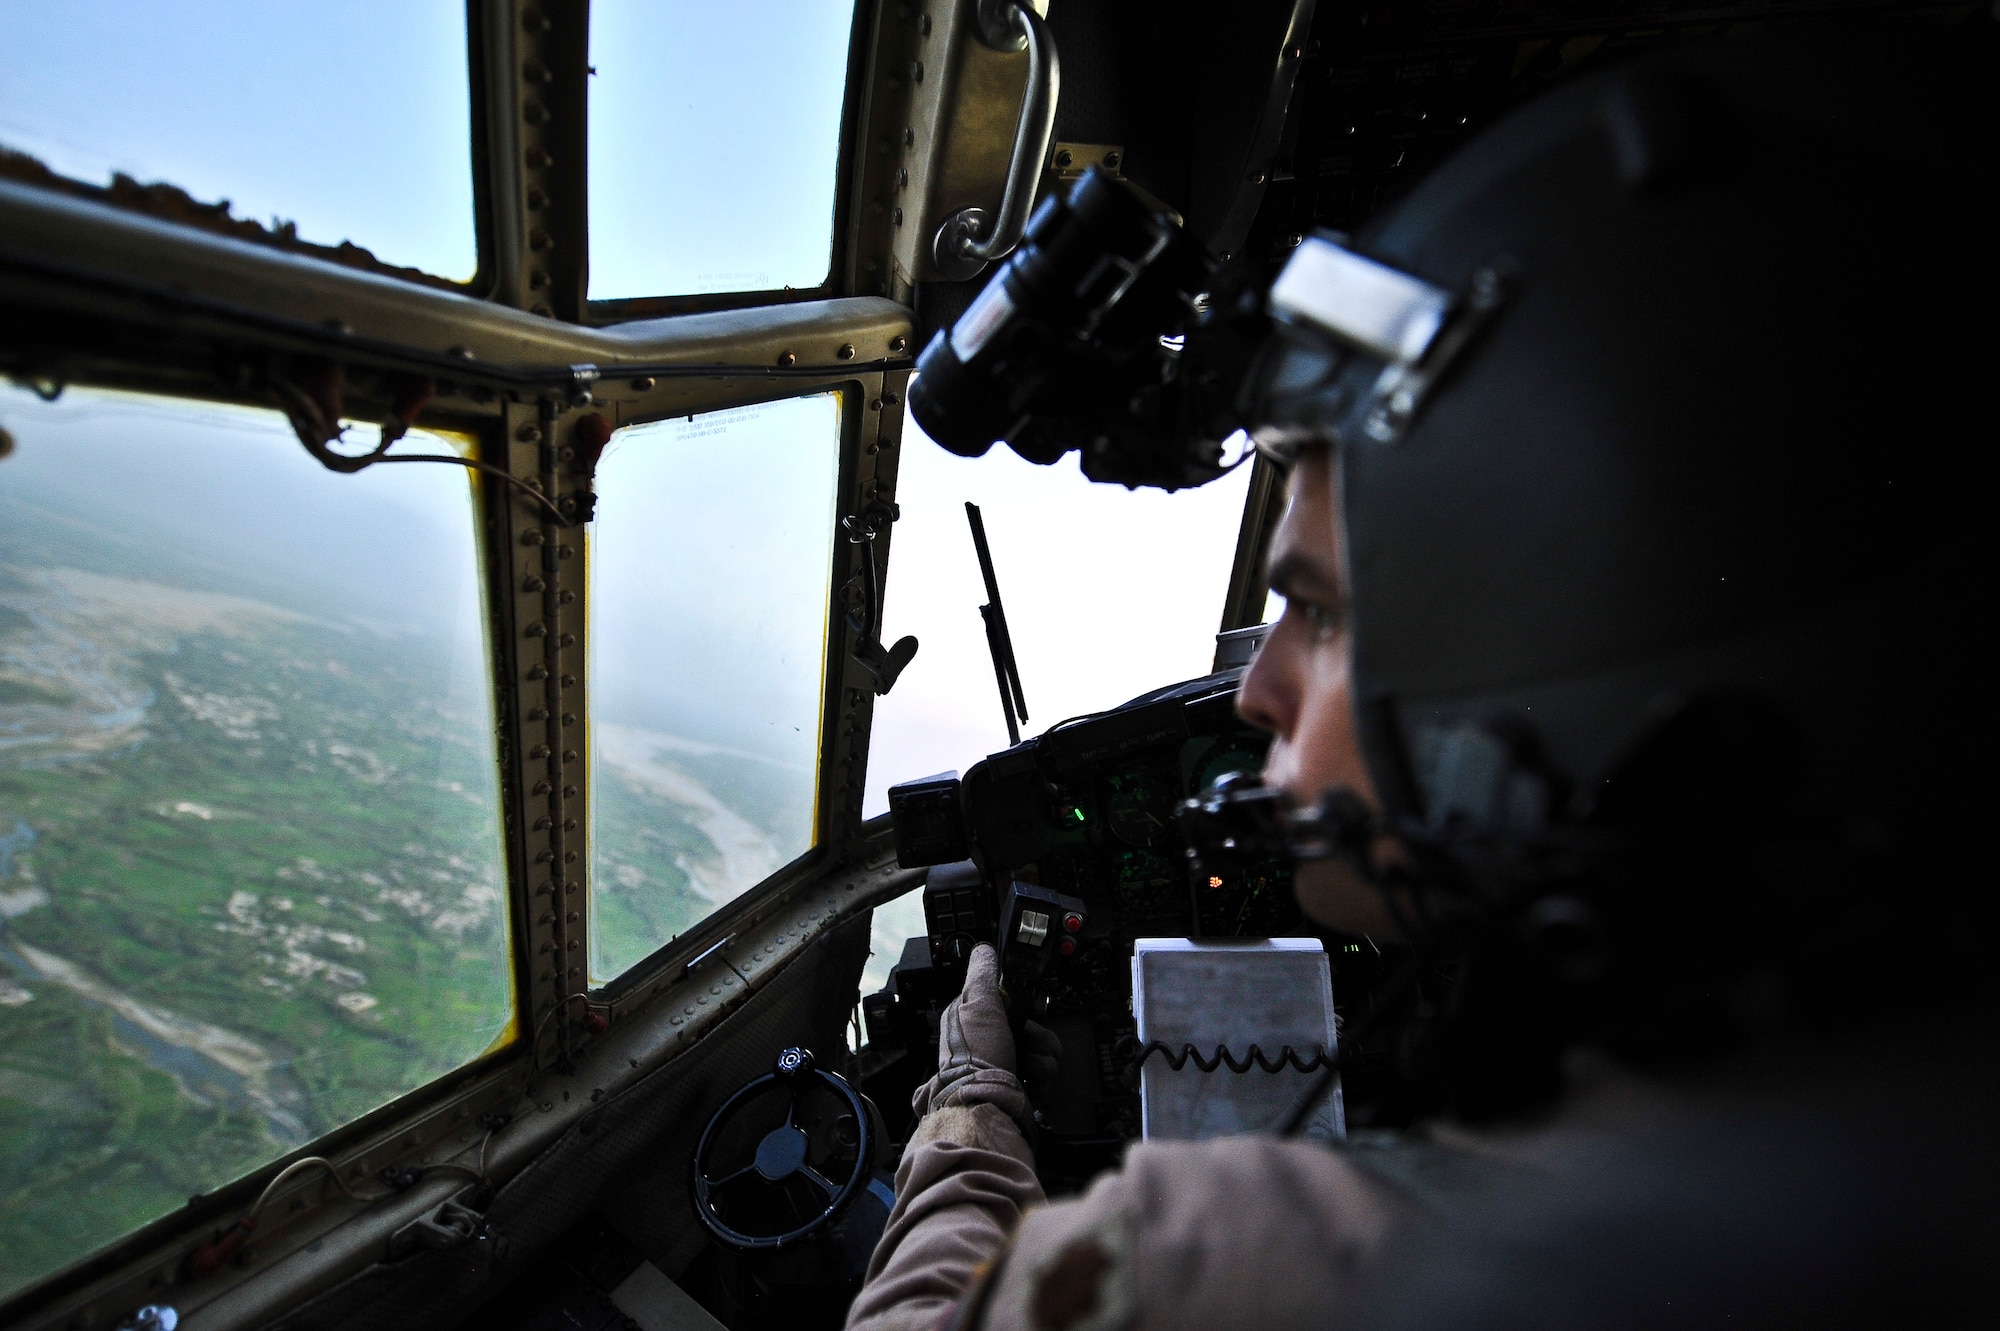 Maj. Stephen Cheek, 746th Expeditionary Airlift Squadron aircraft commander, checks the terrain from the cockpit of a C-130 Hercules during an aeromedical evacuation flight, Aug 7.  Cheek hails from Southern Pines, N.C., and is deployed from Pope Field, N.C. (U.S. Air Force photo/Senior Airman Paul Labbe)